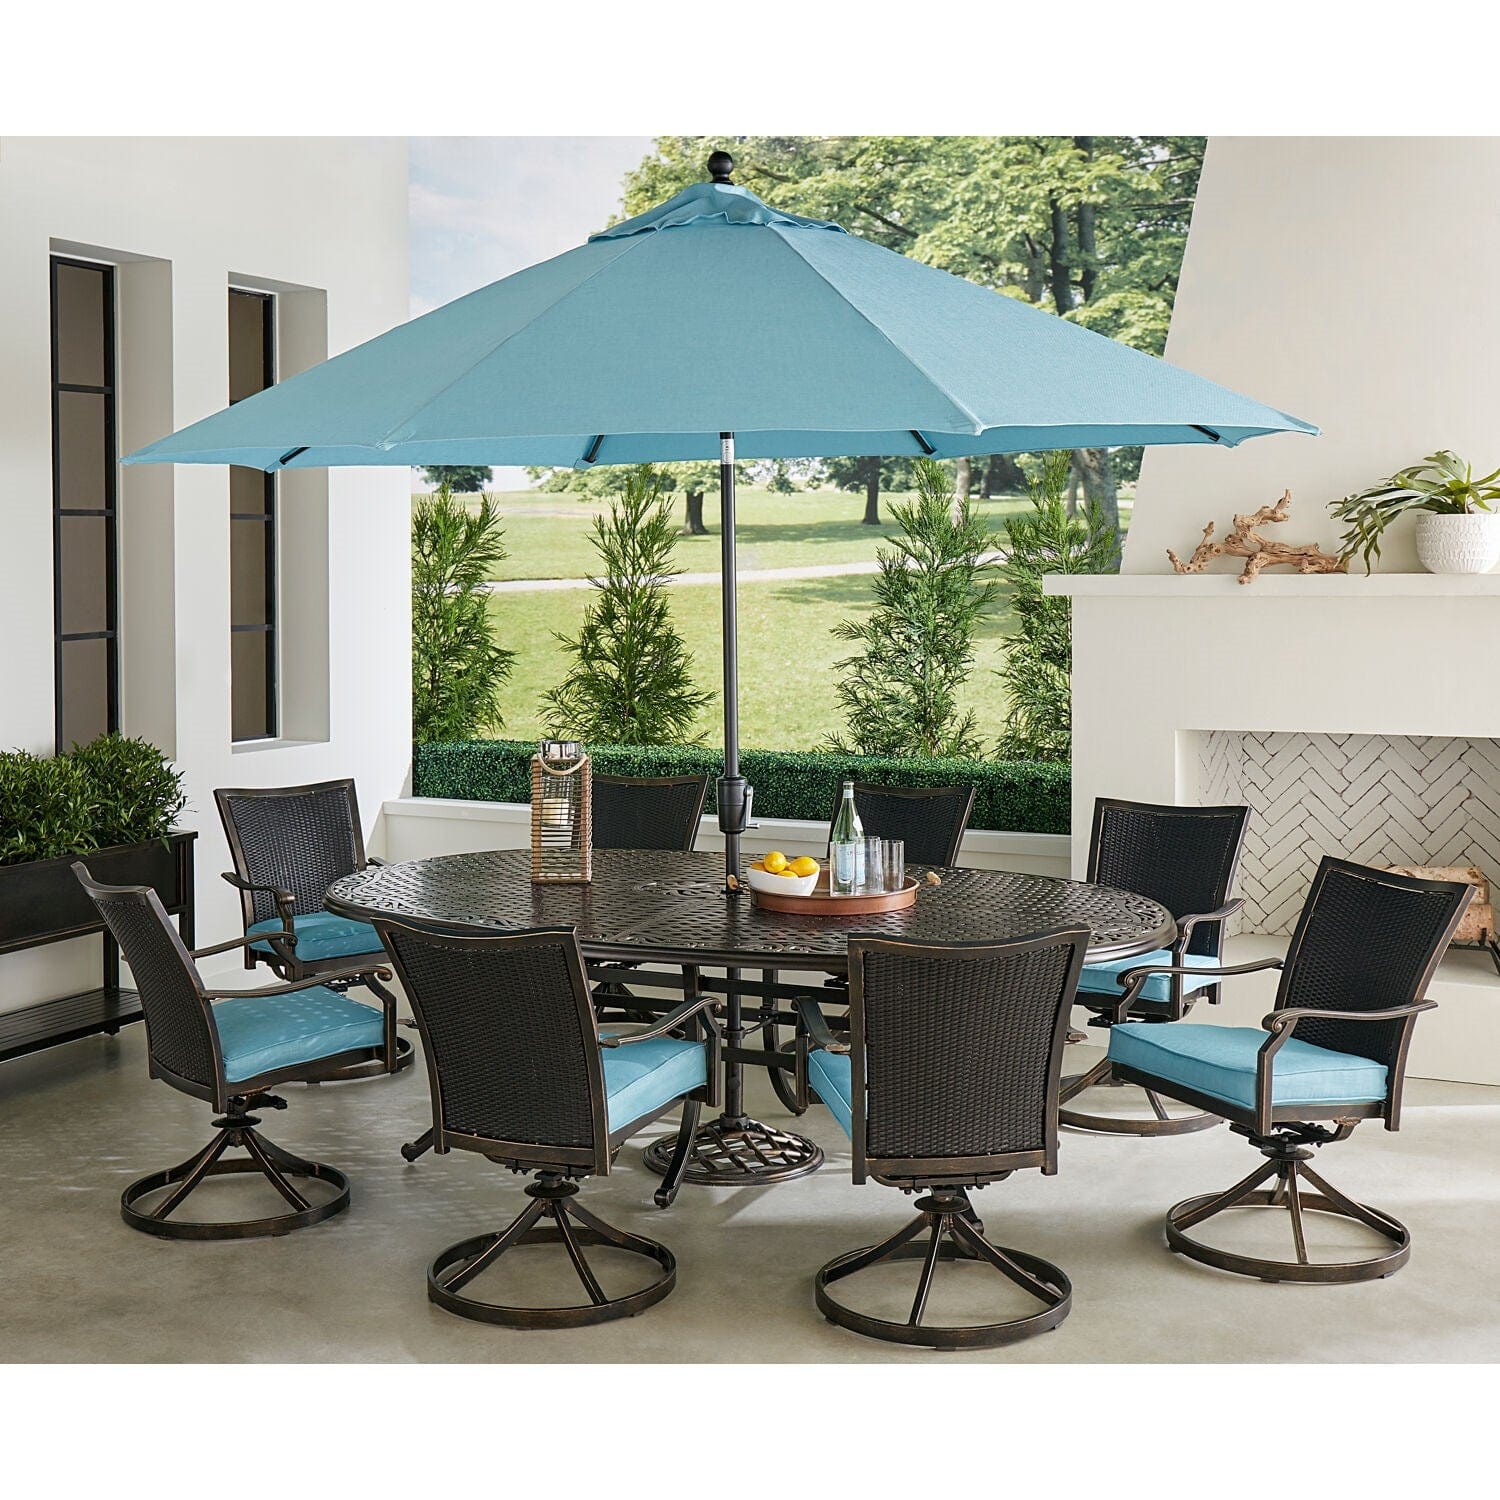 Hanover Outdoor Dining Set Hanover Traditions 9-Piece Set in Blue with 8 Wicker Back Swivel Rockers, 95-in. x 60-in. Oval Cast Dining Table, Umbrella and Stand